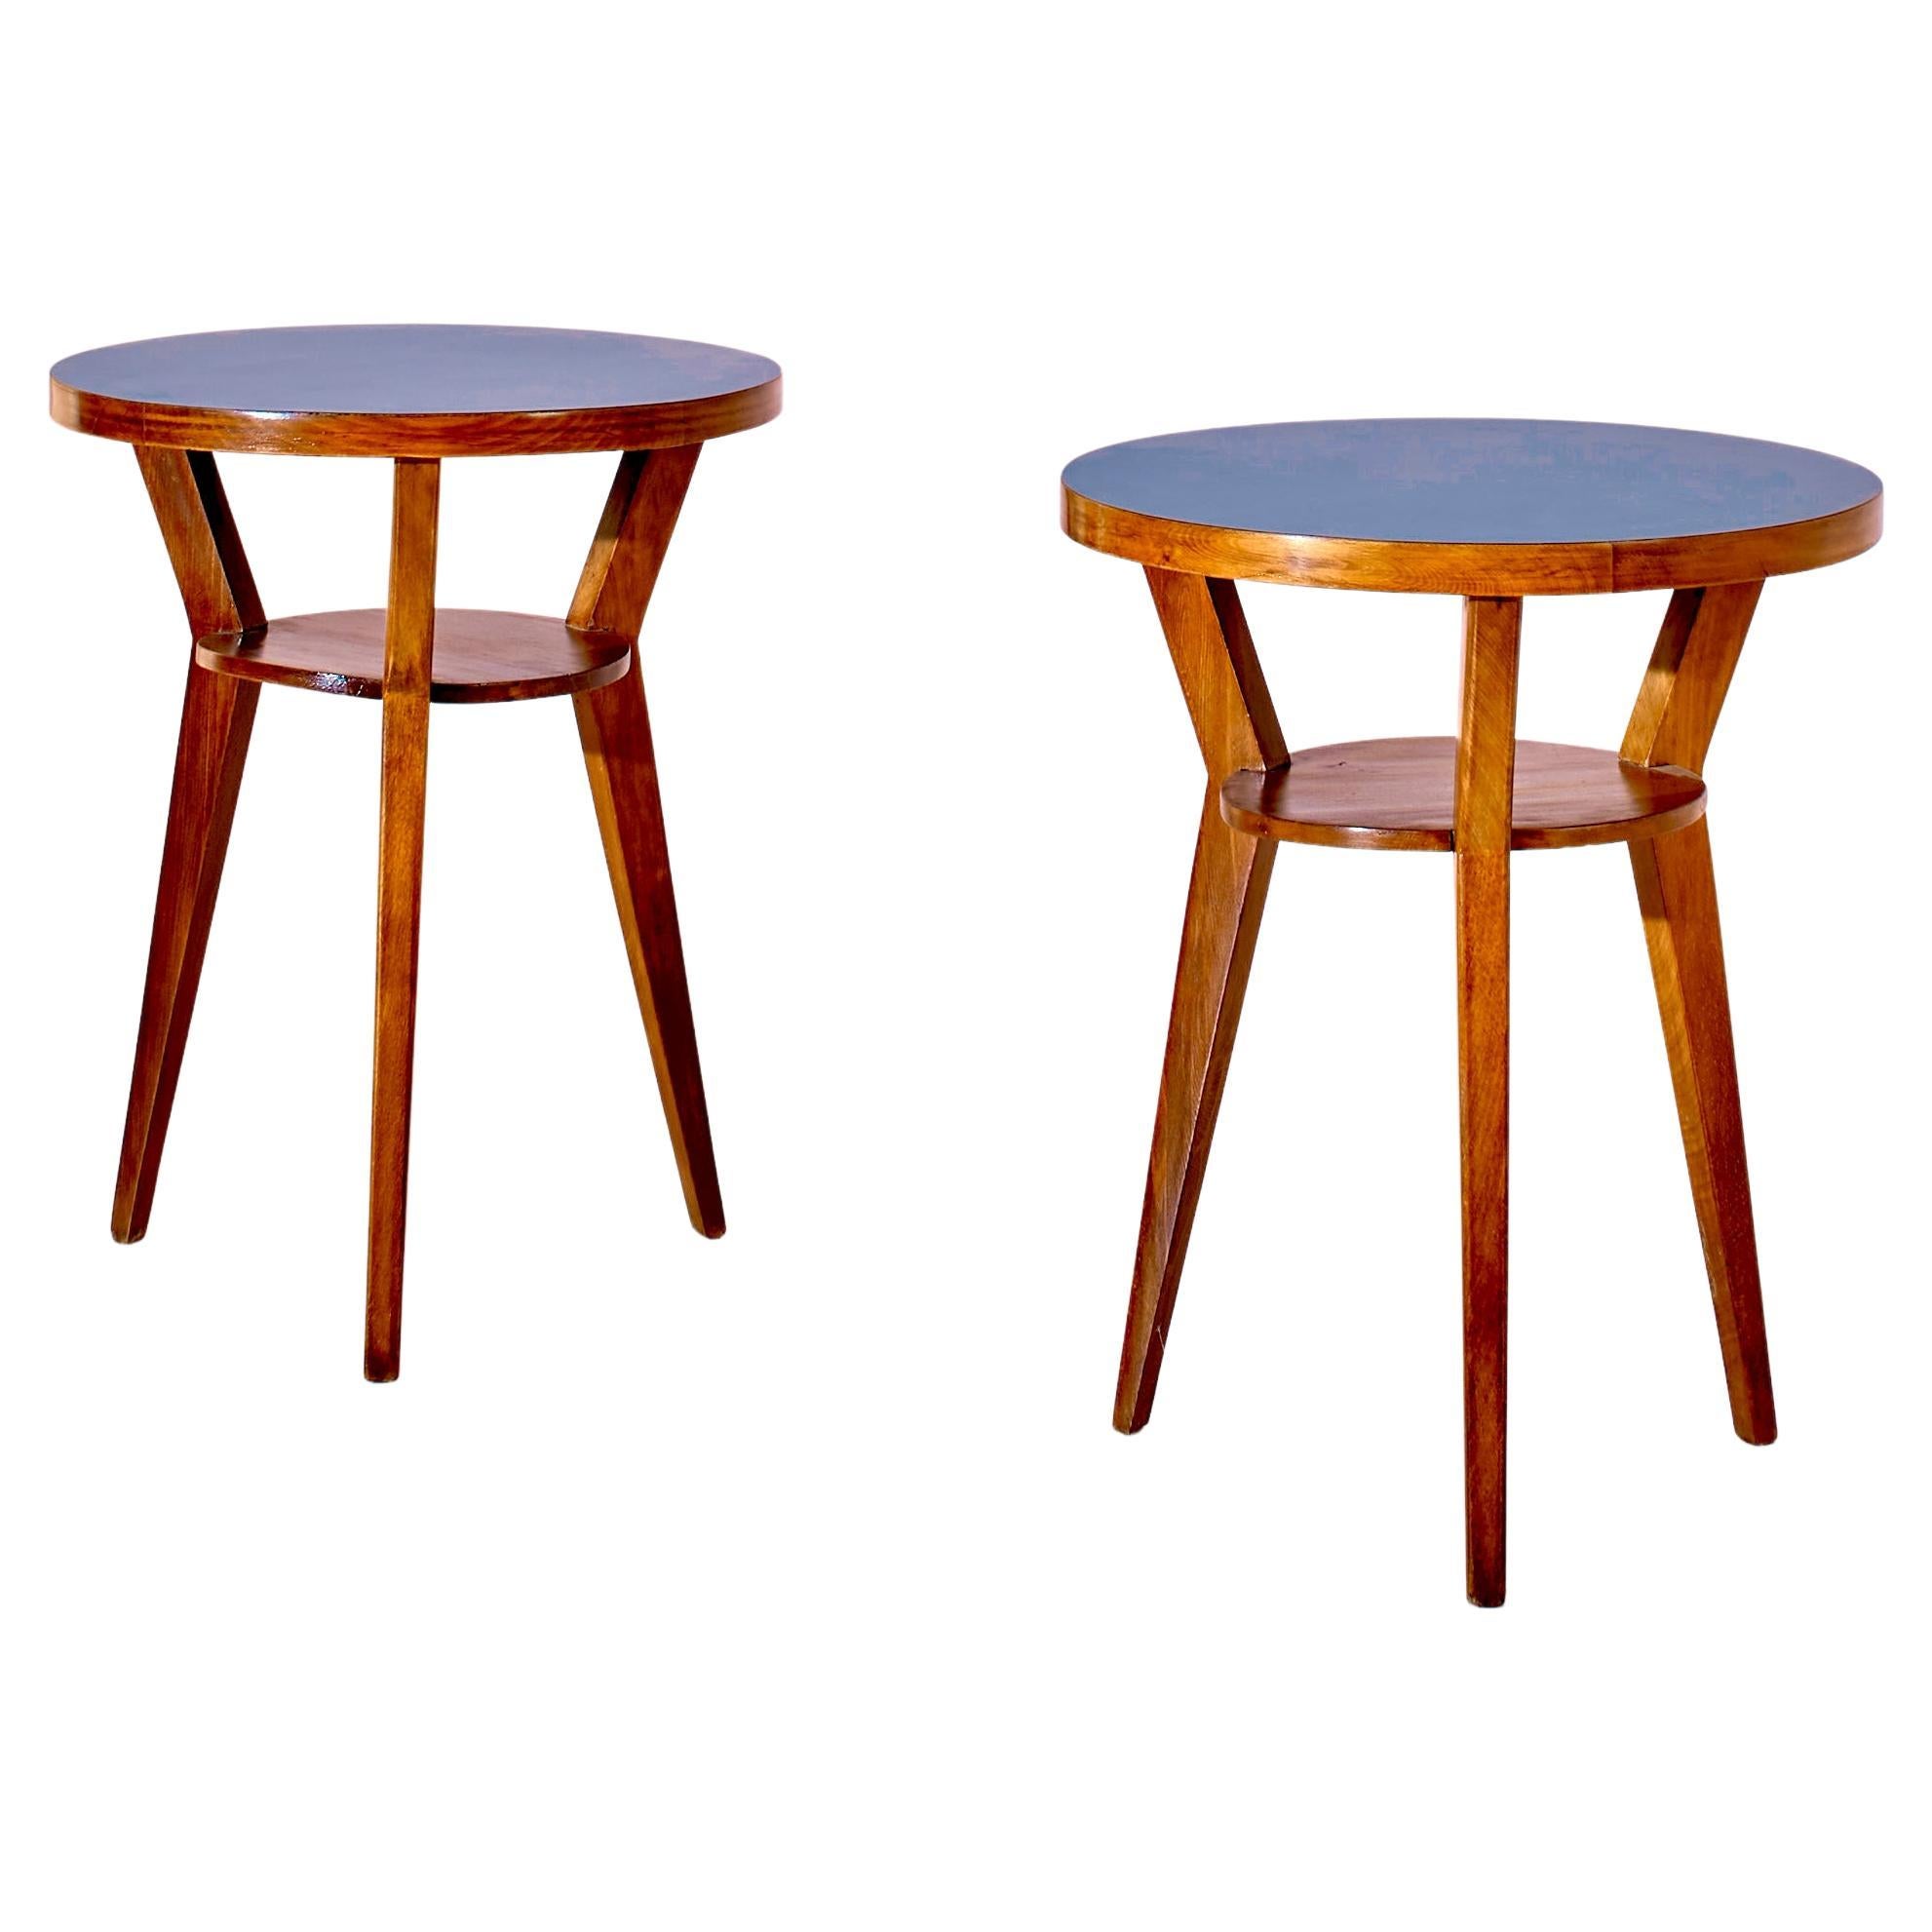 Gio Ponti pair of walnut and blue formica occasional tables, Italy, circa 1950